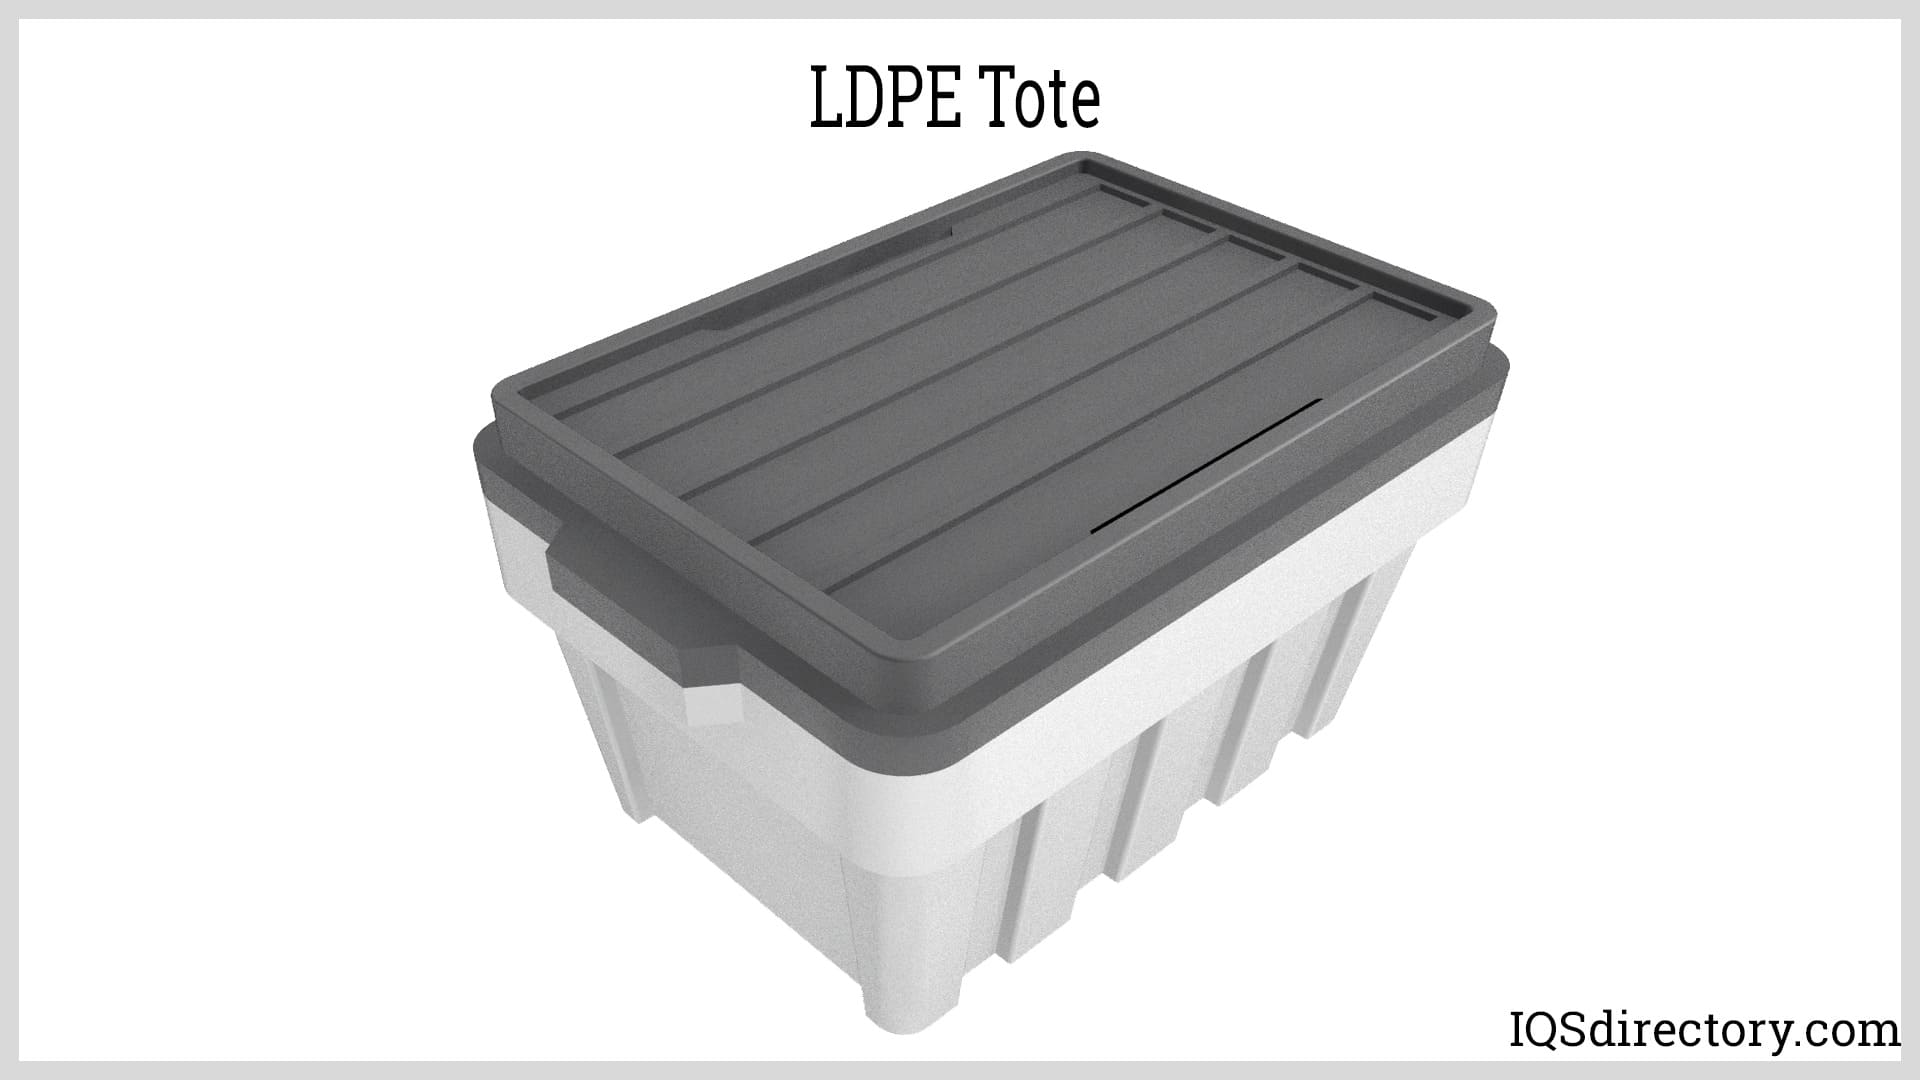 LDPE Tote